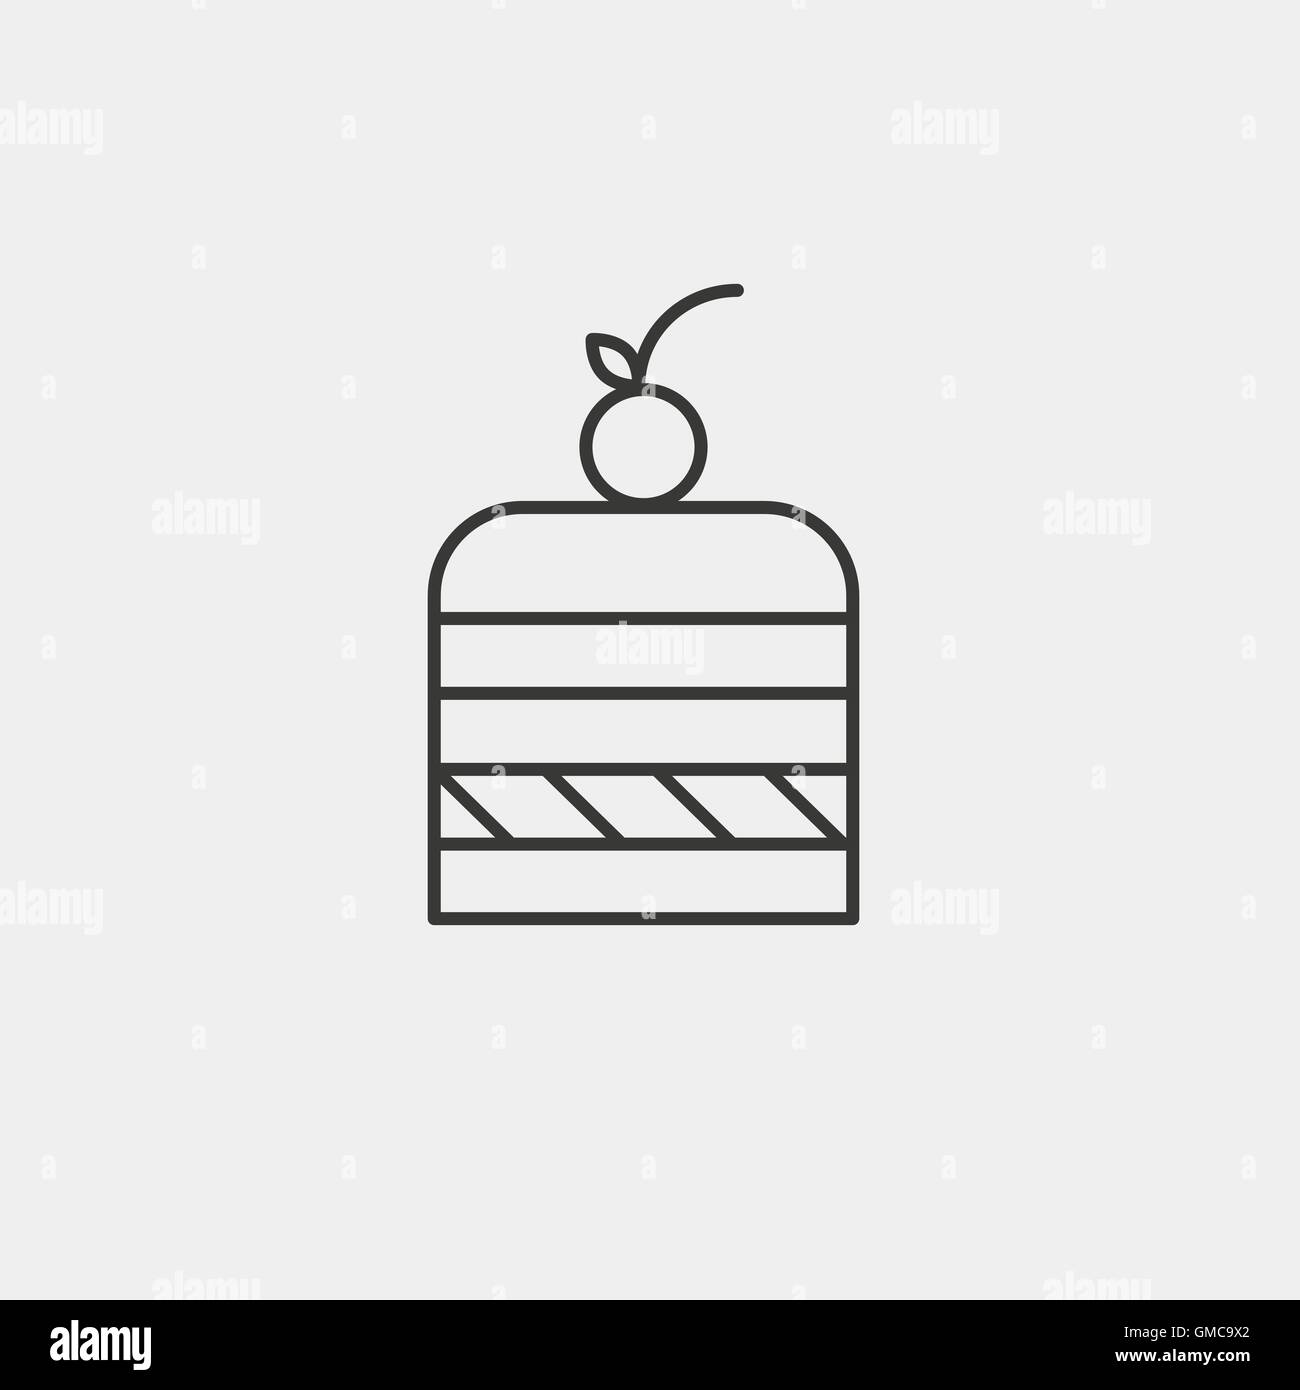 piece of cake icon in brown outline for illustration Stock Vector